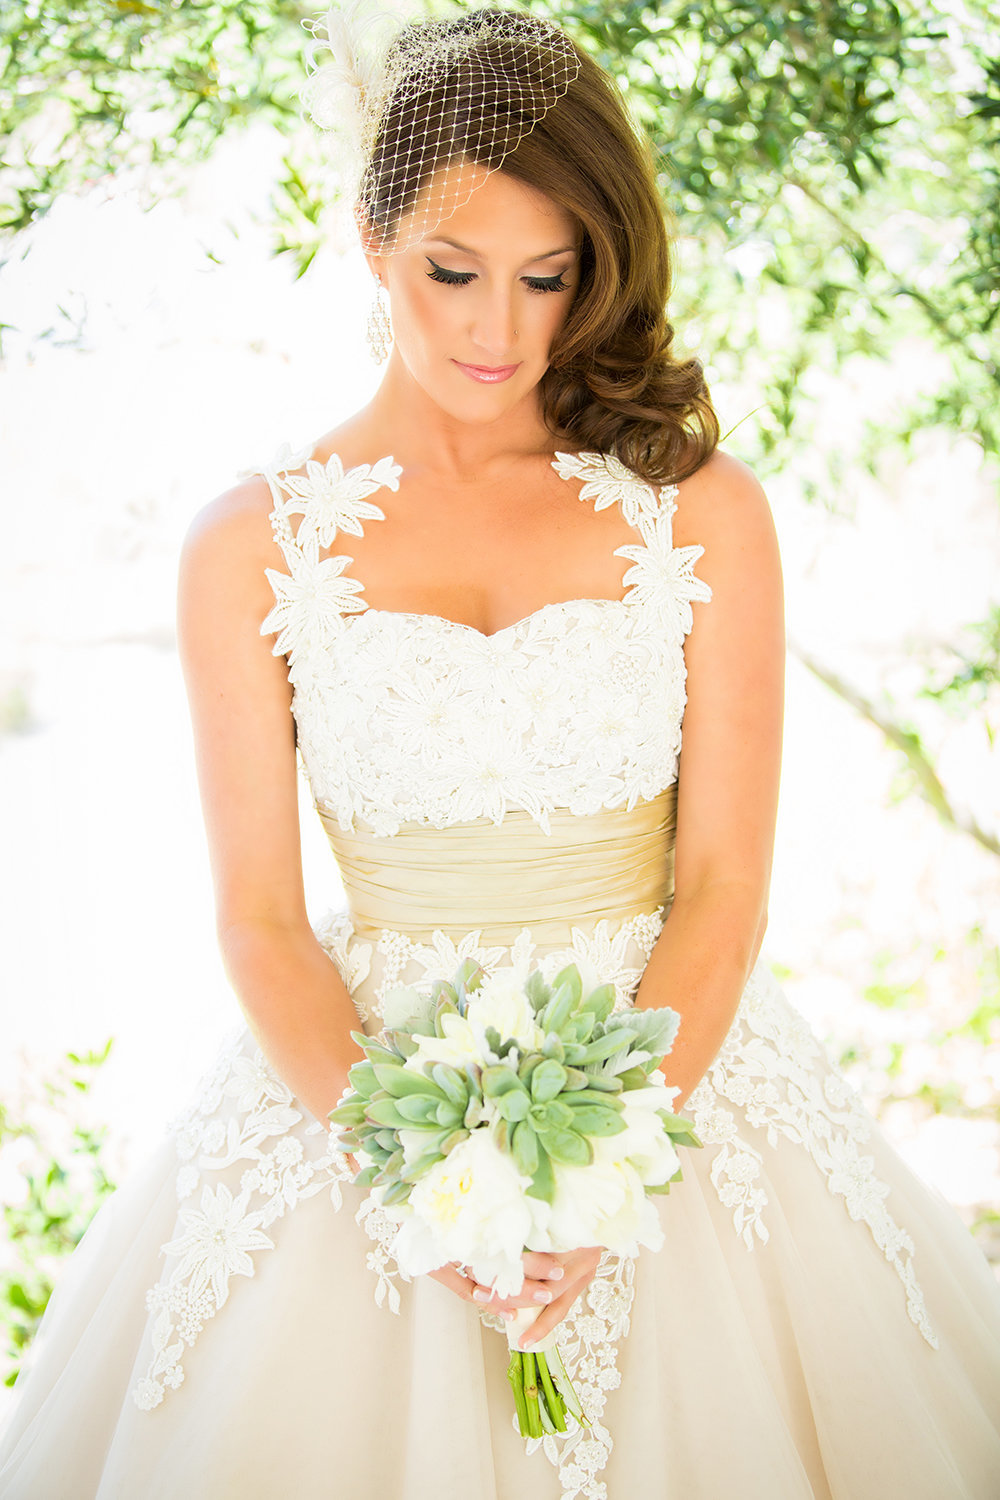 Los Willows wedding photos beautiful bride with flowers